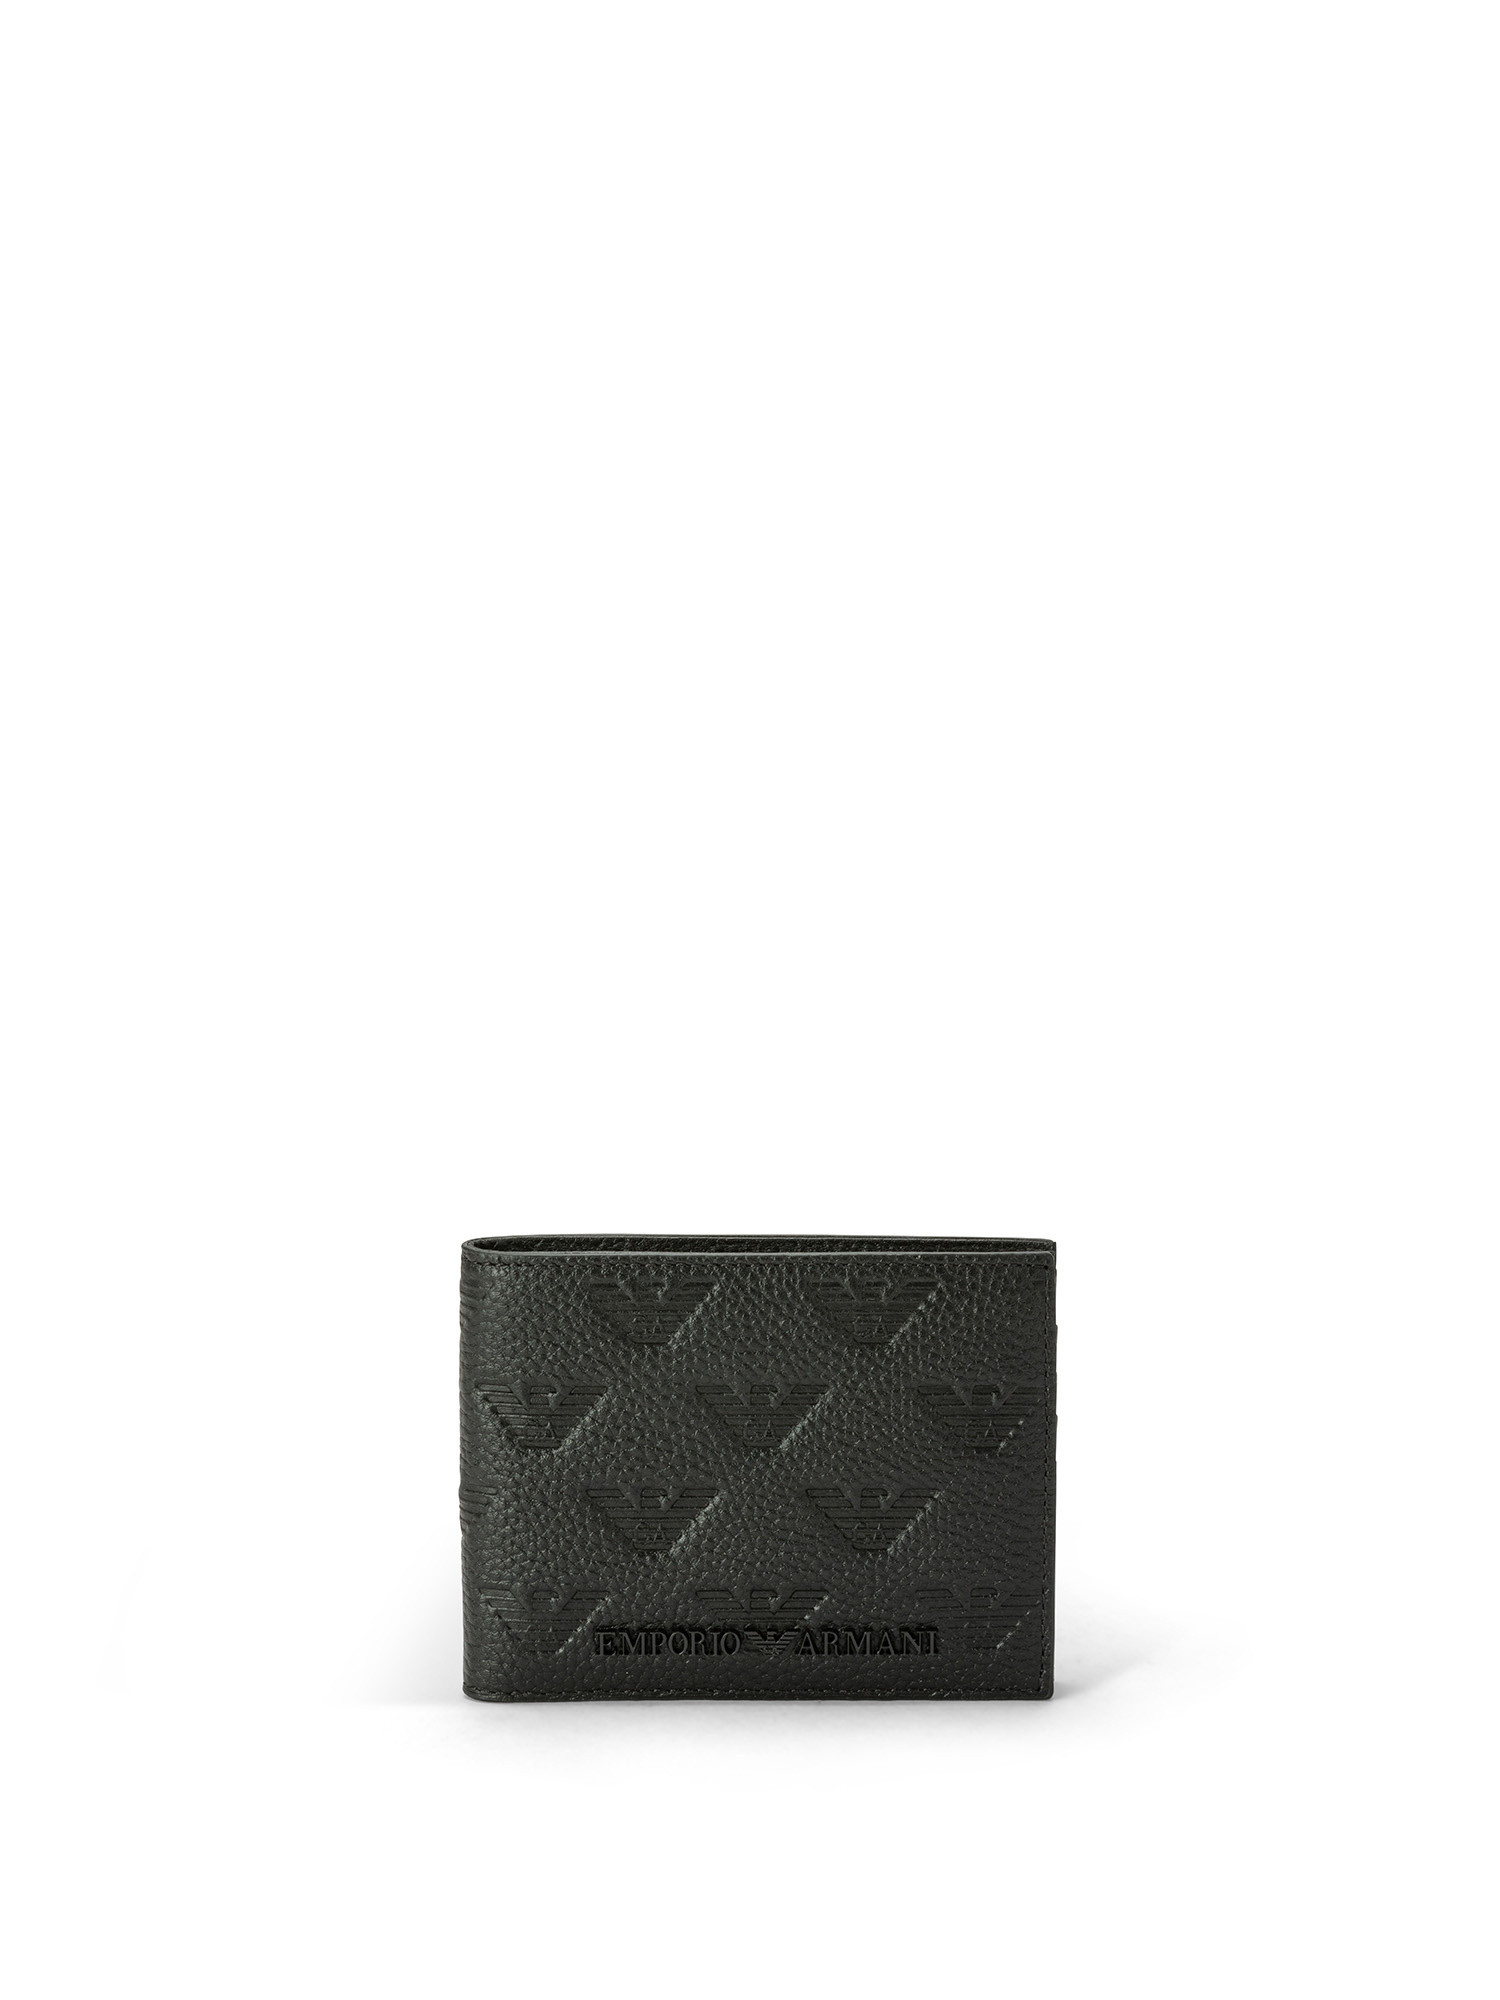 Emporio Armani - Leather wallet with all-over eagle logo, Black, large image number 0